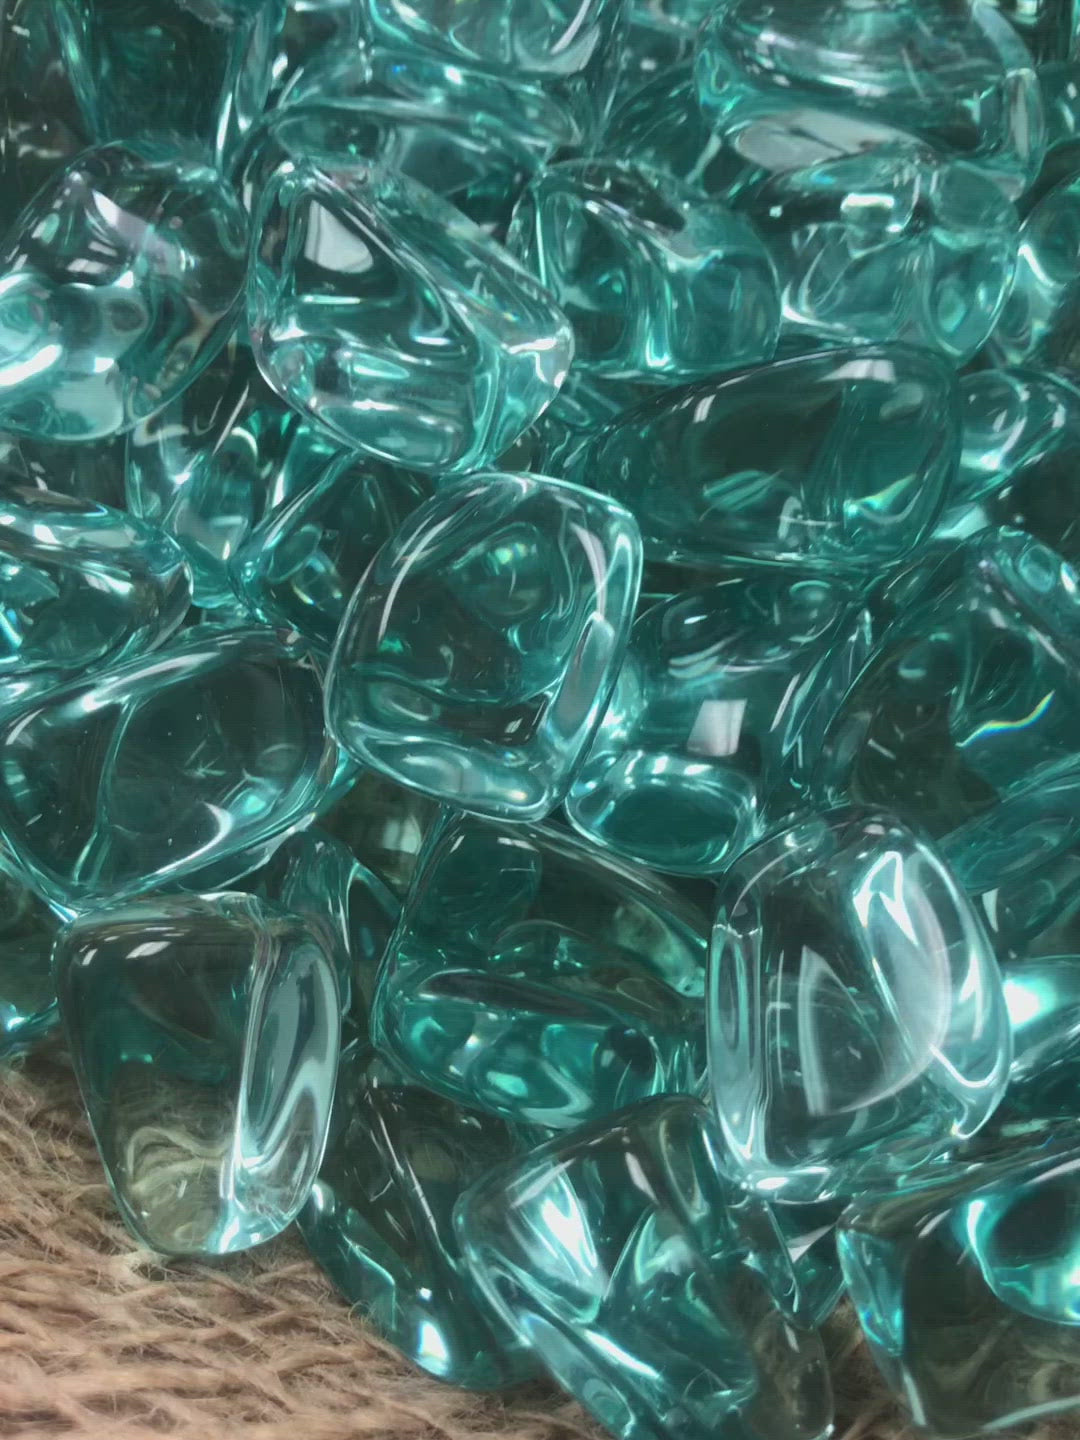 Aqua Blue Obsidian cannot be used for evil. This is the protection stone for 